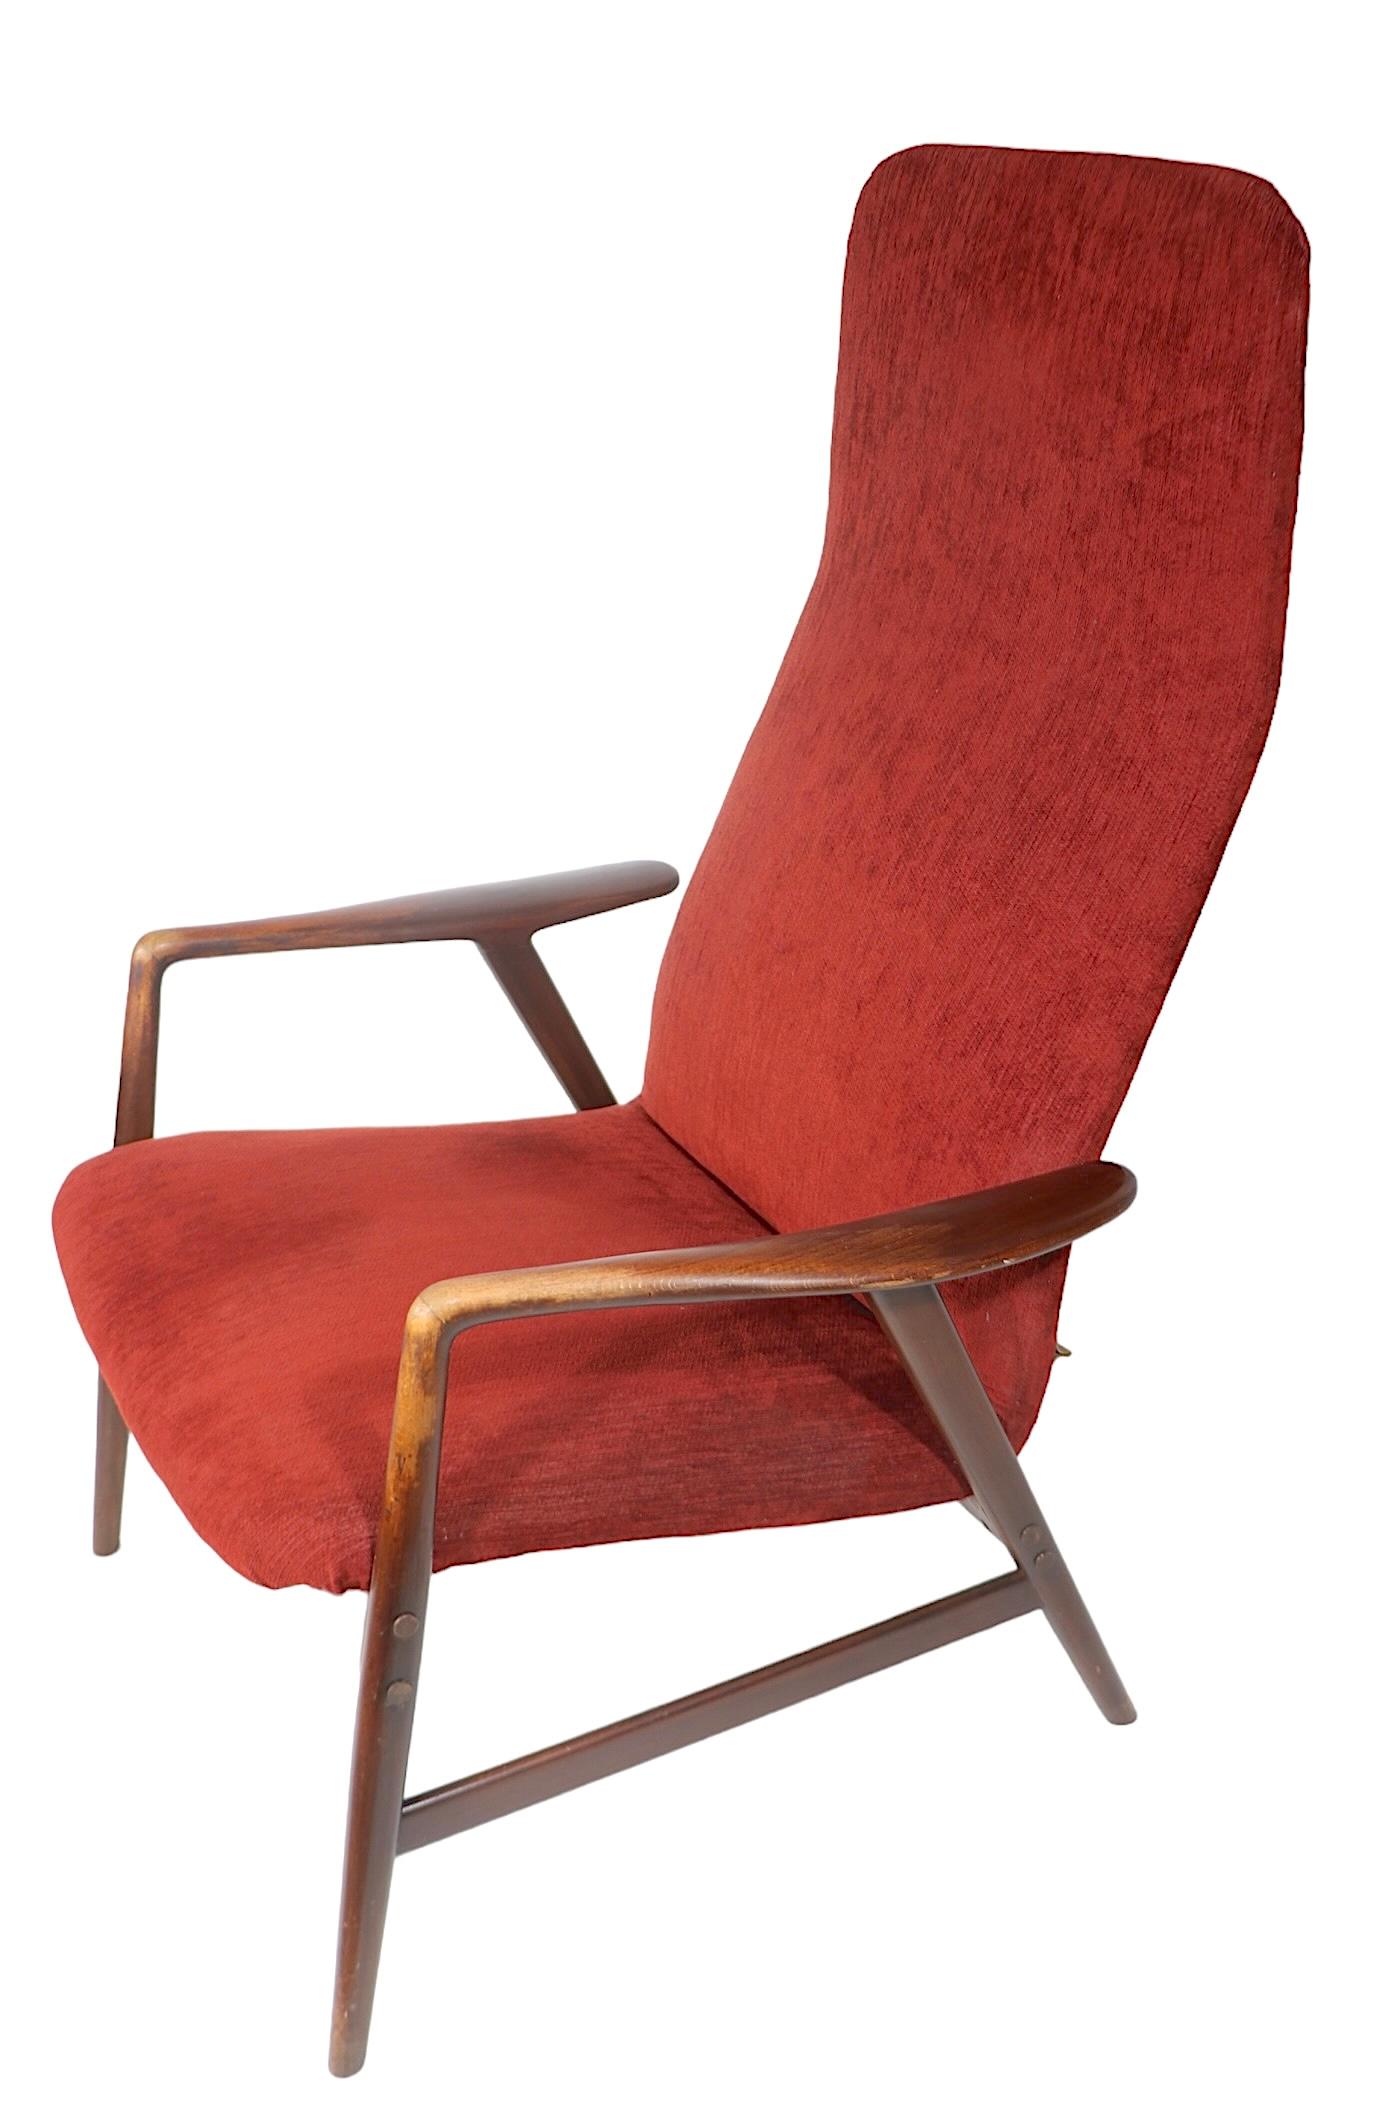 Danish Mid Century Lounge Chair and Ottoman by Alf Svensson for Fritz Hansen c. 1960's For Sale